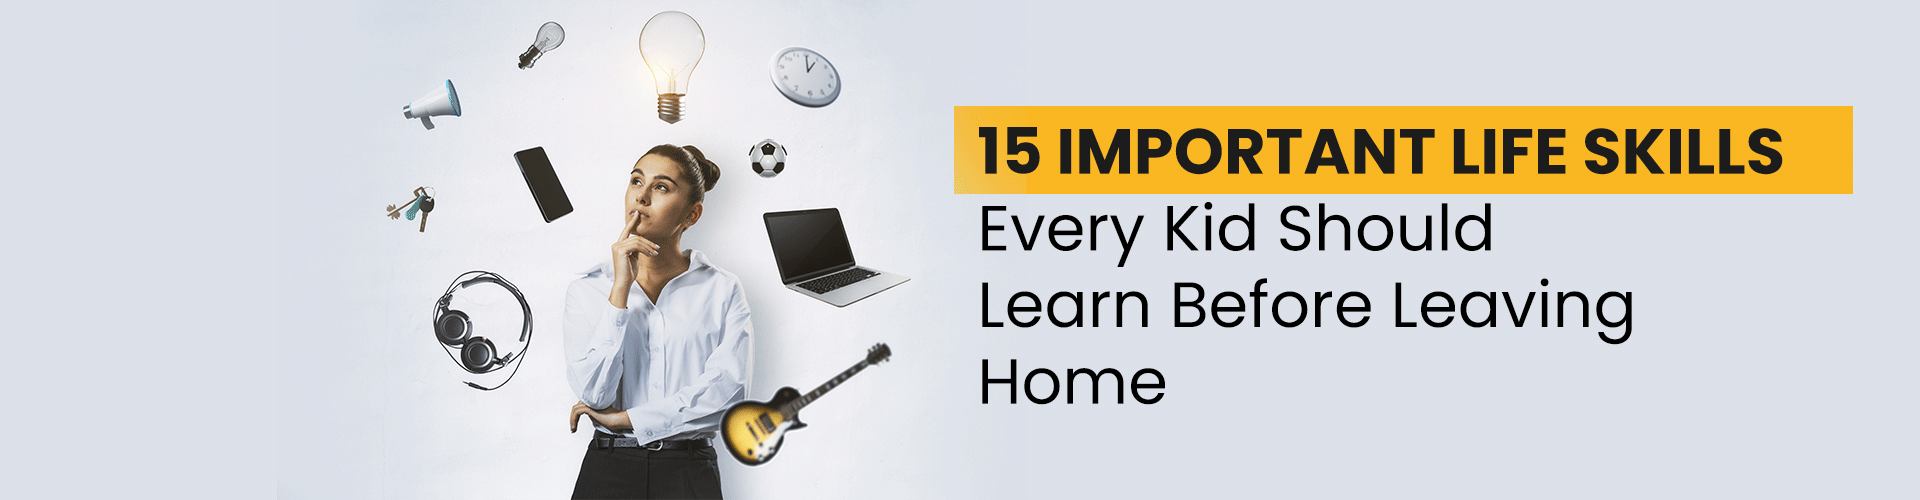 Important Life Skills Every Kid Should Learn Before Leaving Home